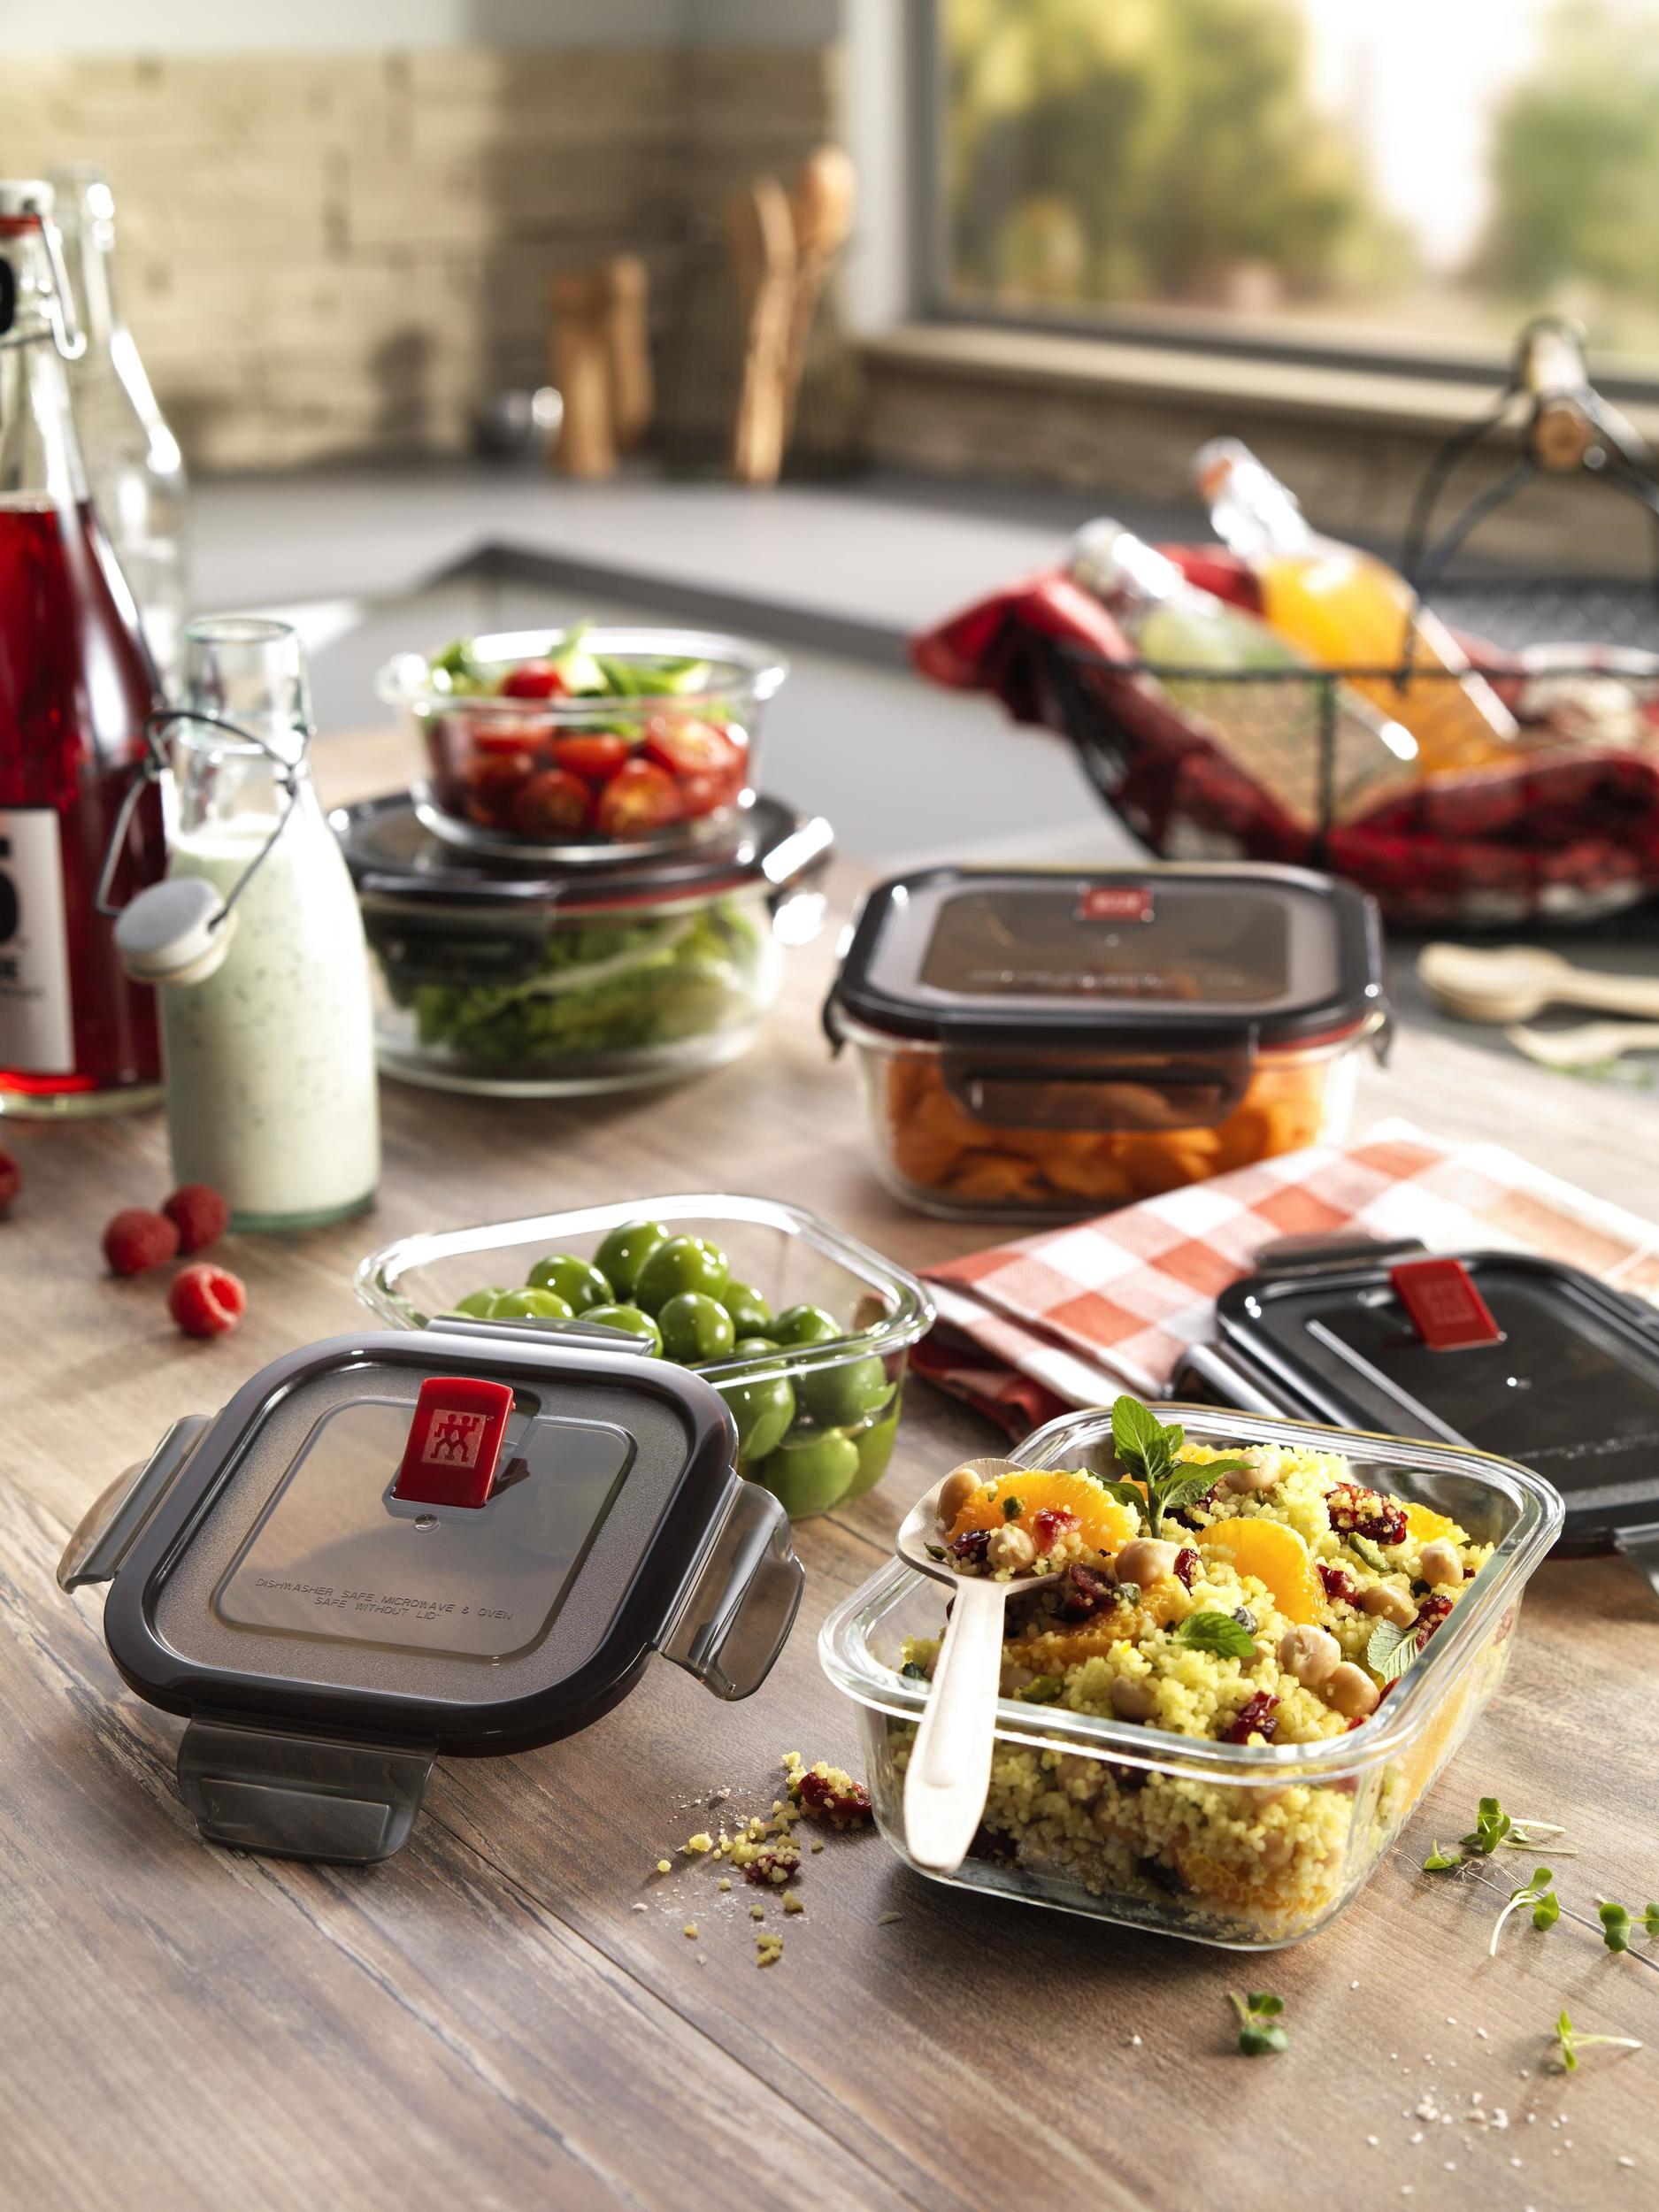 https://3fa-media.com/zwilling/zwilling-gusto-kitchen-container-rectangular__130002_02d8eea-s2500x2500.jpg